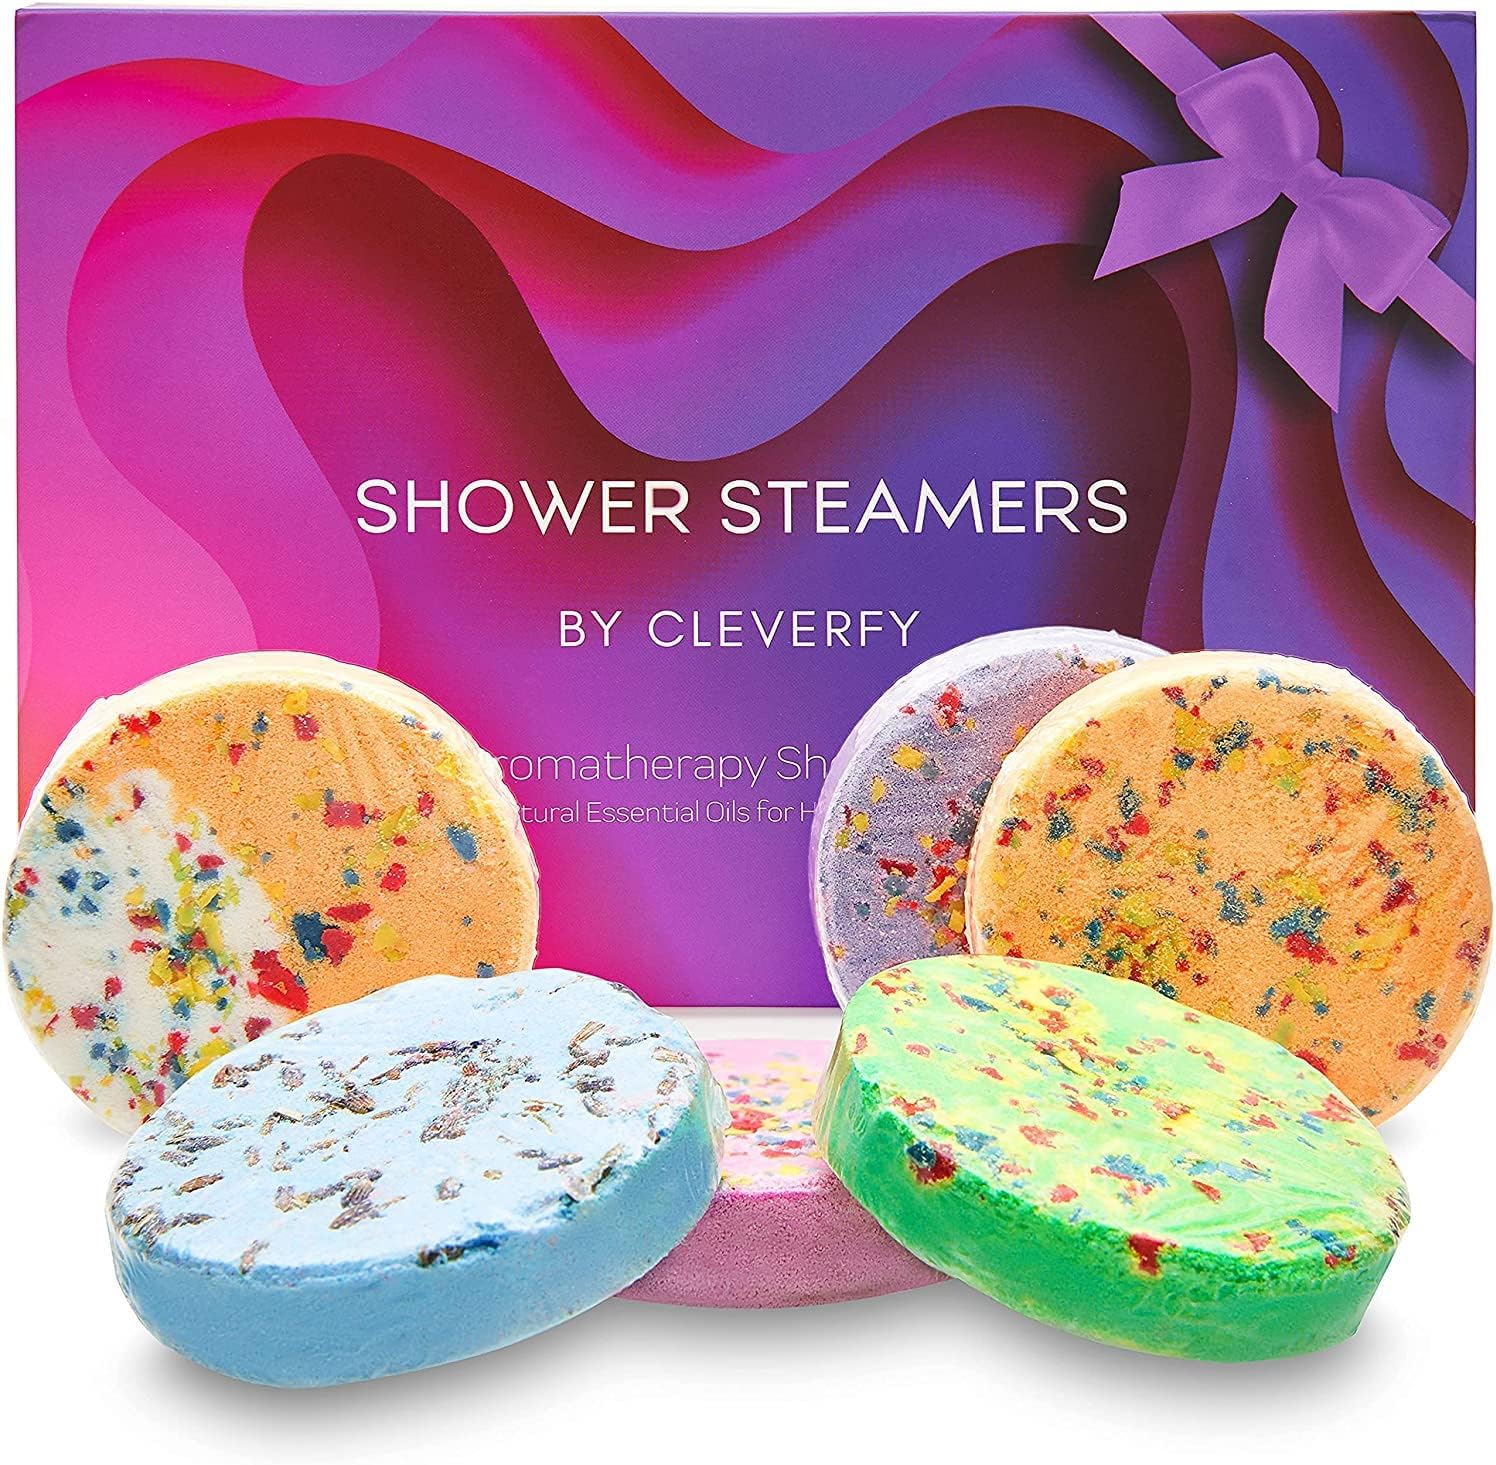 cleverly shower steamers aromatherapy-variety pack of 6 shower bombs with essential oils top 14 christmas gift for old lady in nursing homes- complete buyer's guide(2023)